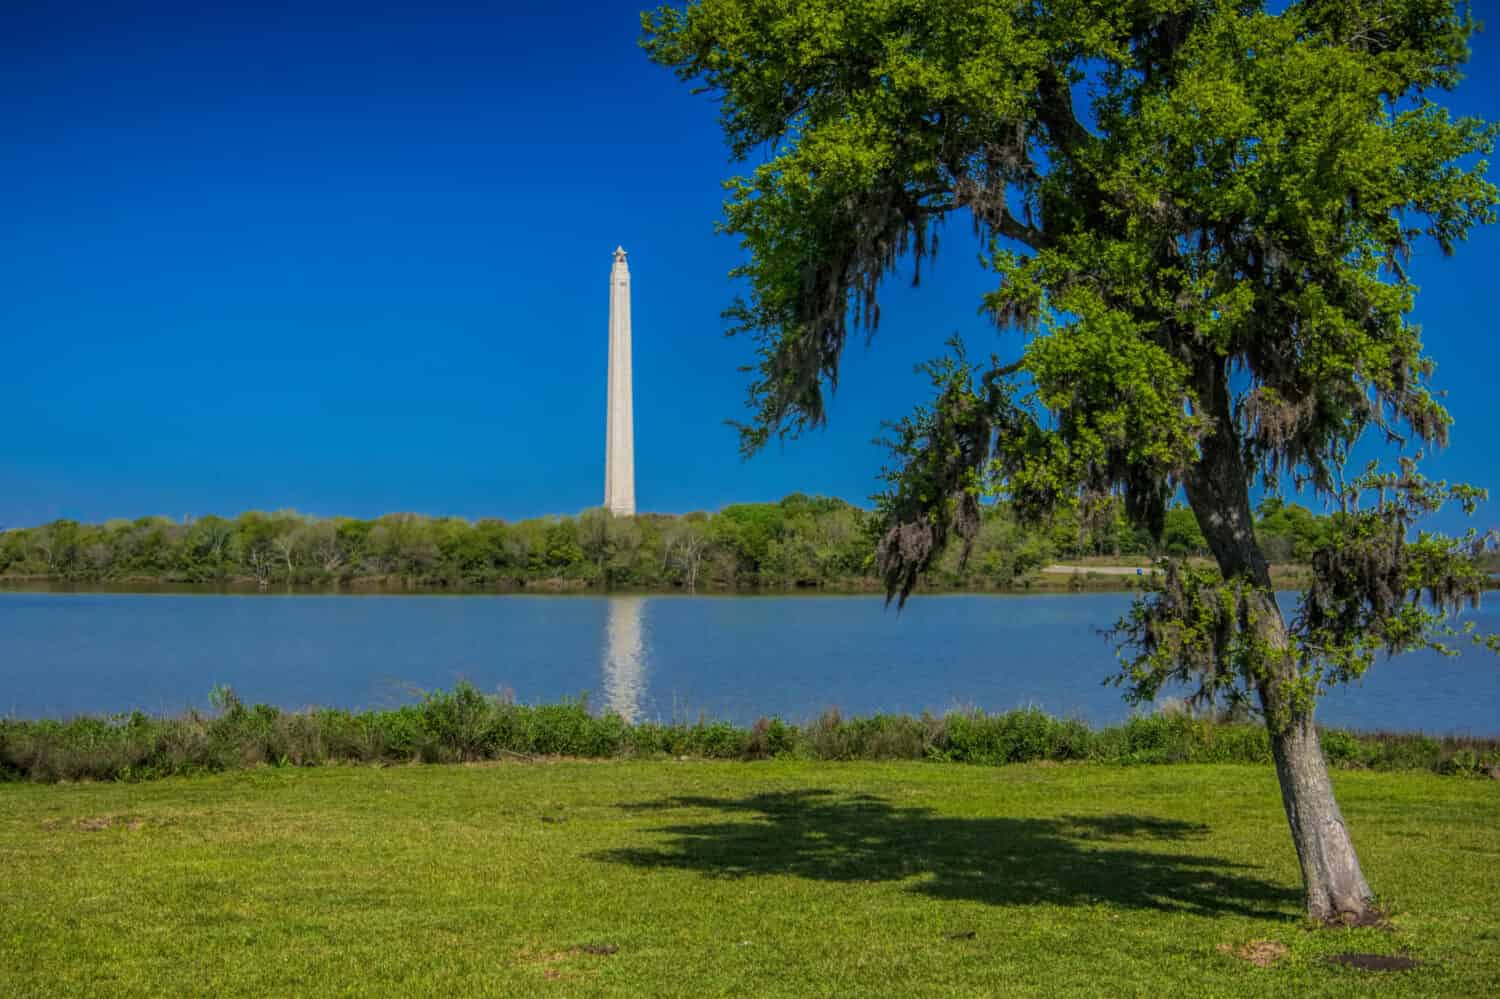 San Jacinto Monument under blue sky across from river.